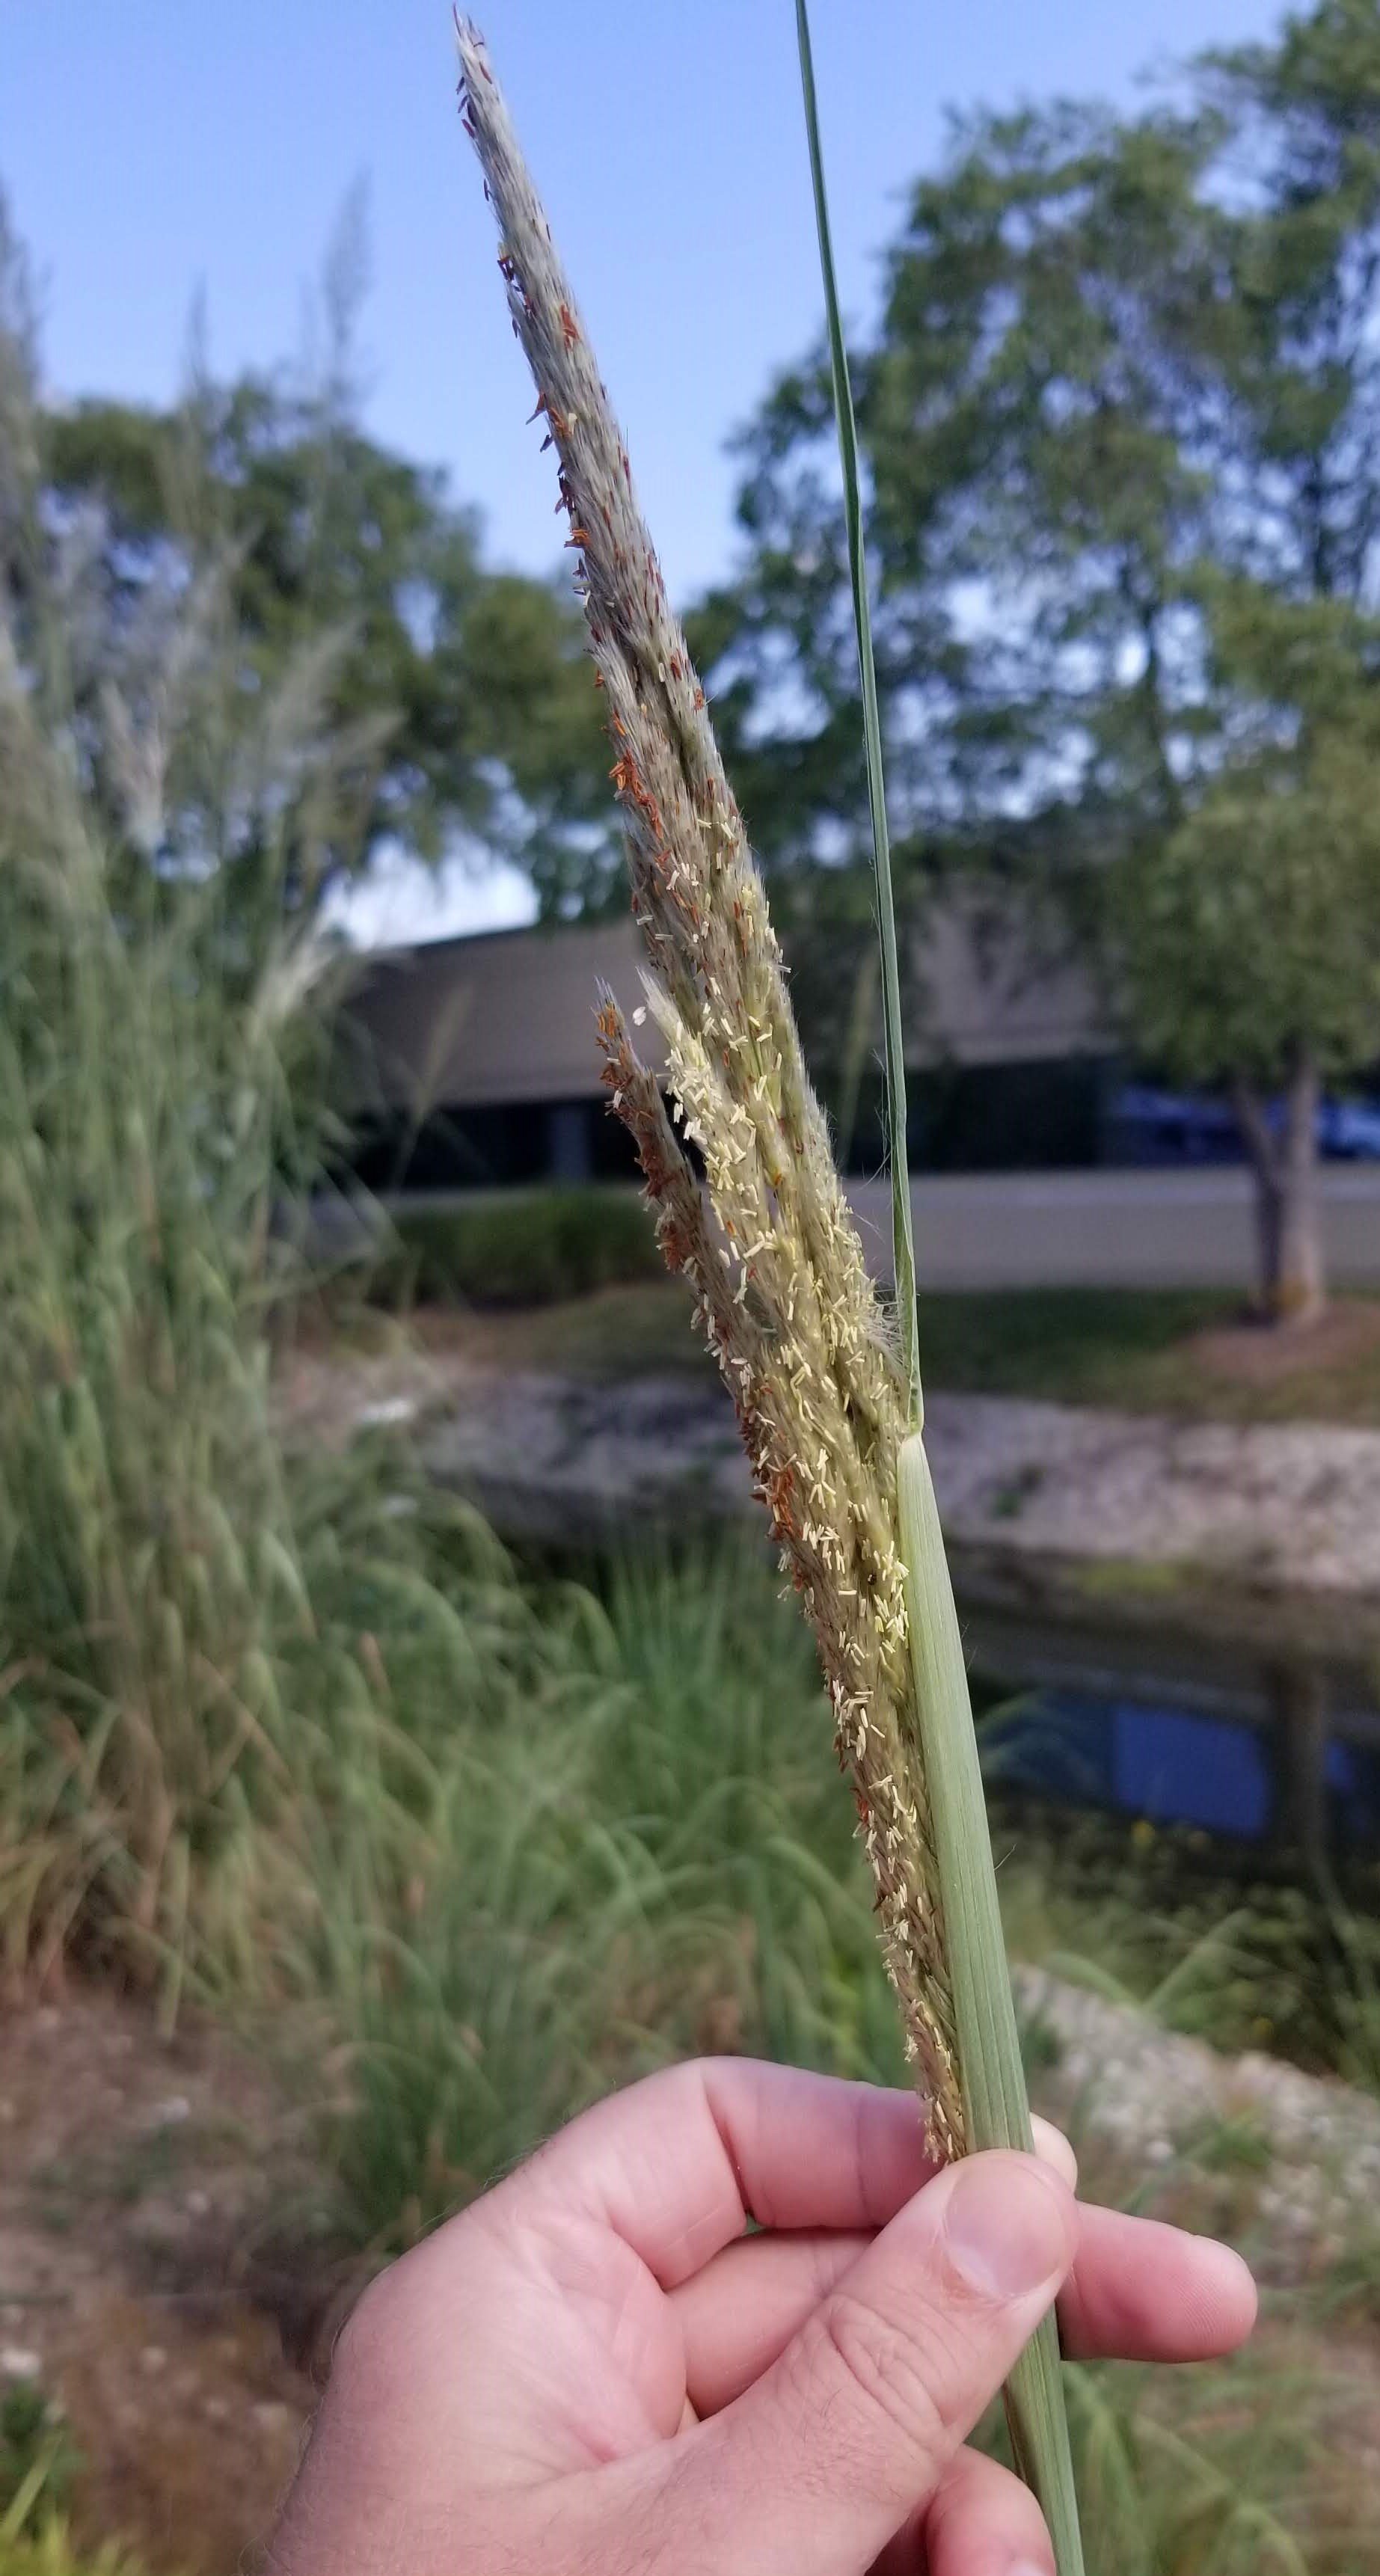 The inflorescence of Ravenna Grass developing with flowering spikelets